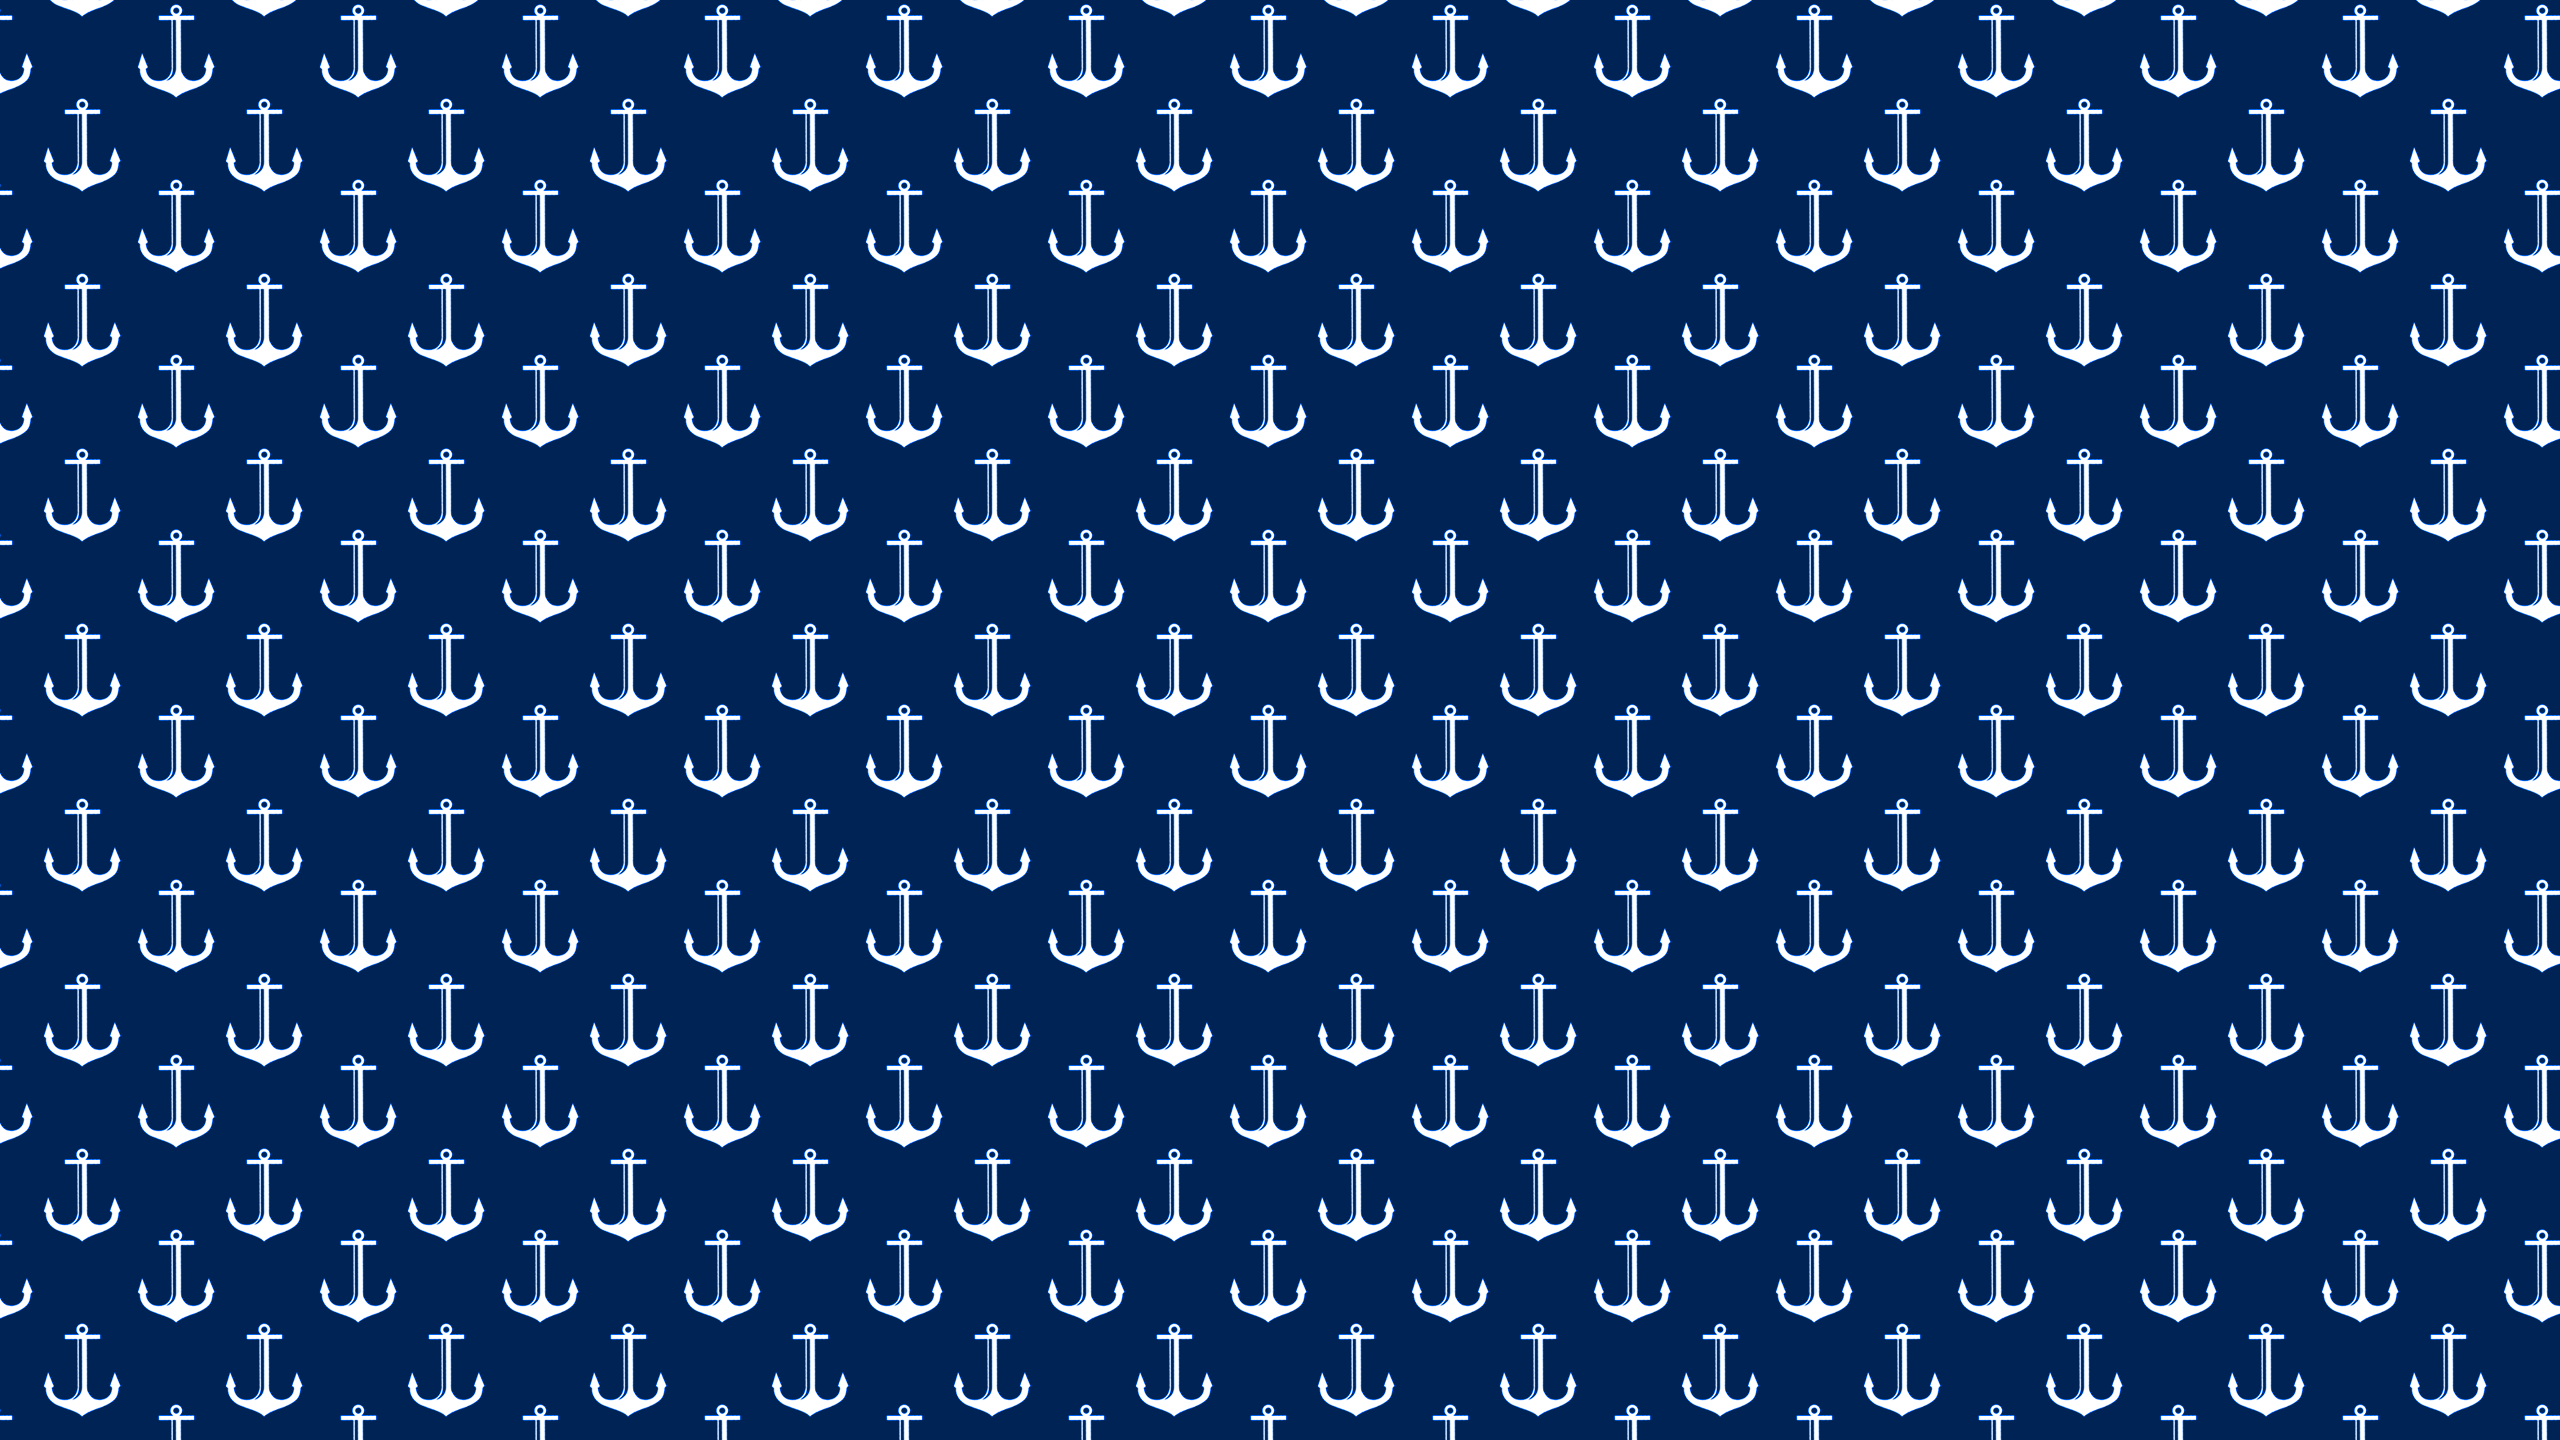 Navy Blue Anchors Desktop Wallpaper is easy Just save the wallpaper 2560x1440